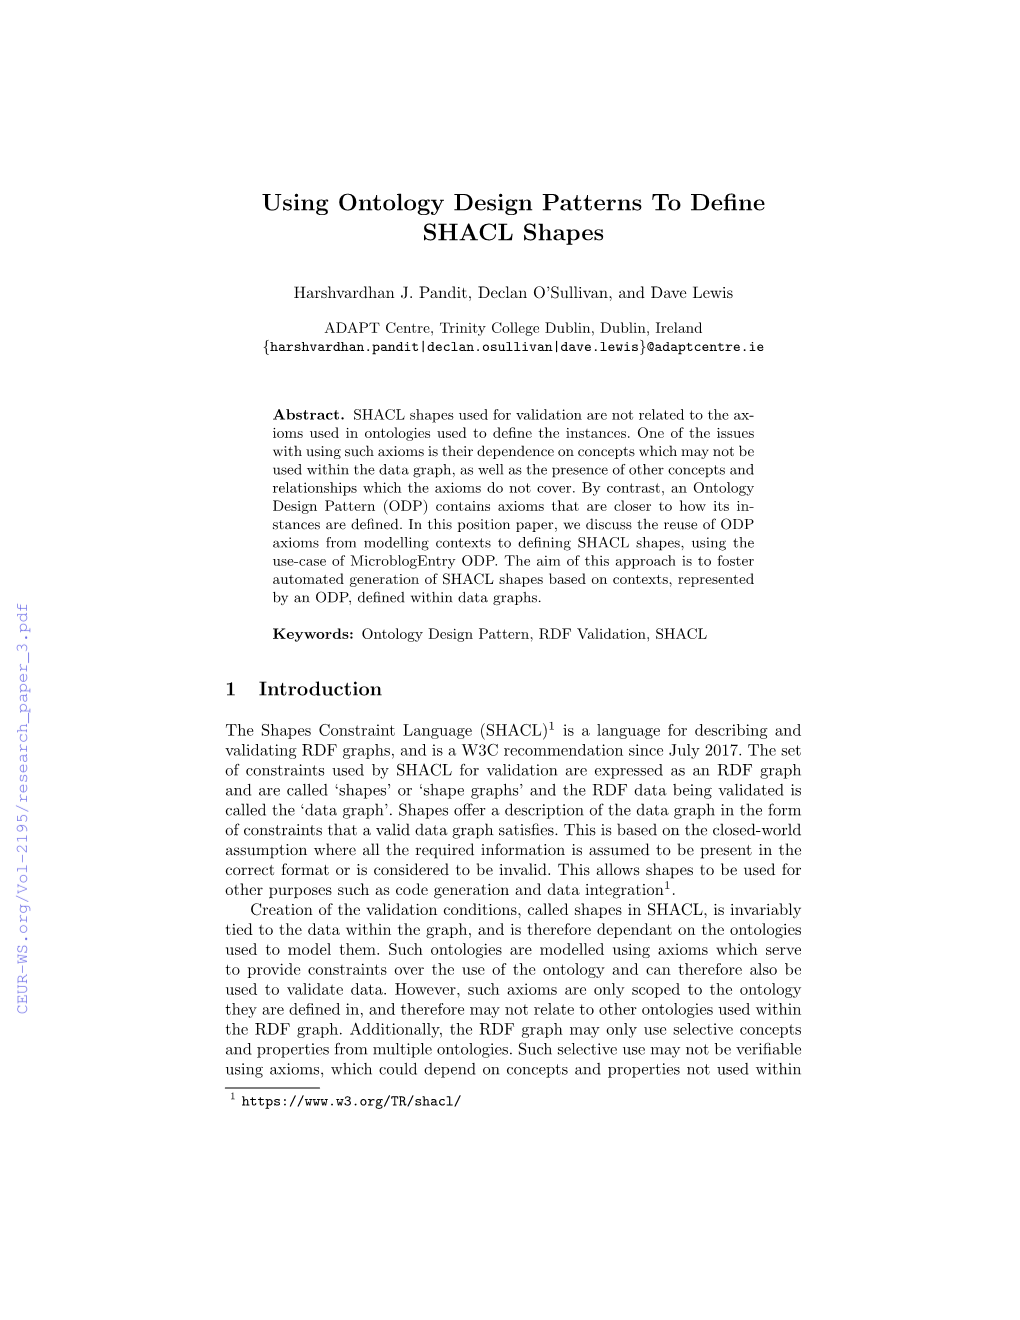 Using Ontology Design Patterns to Define SHACL Shapes